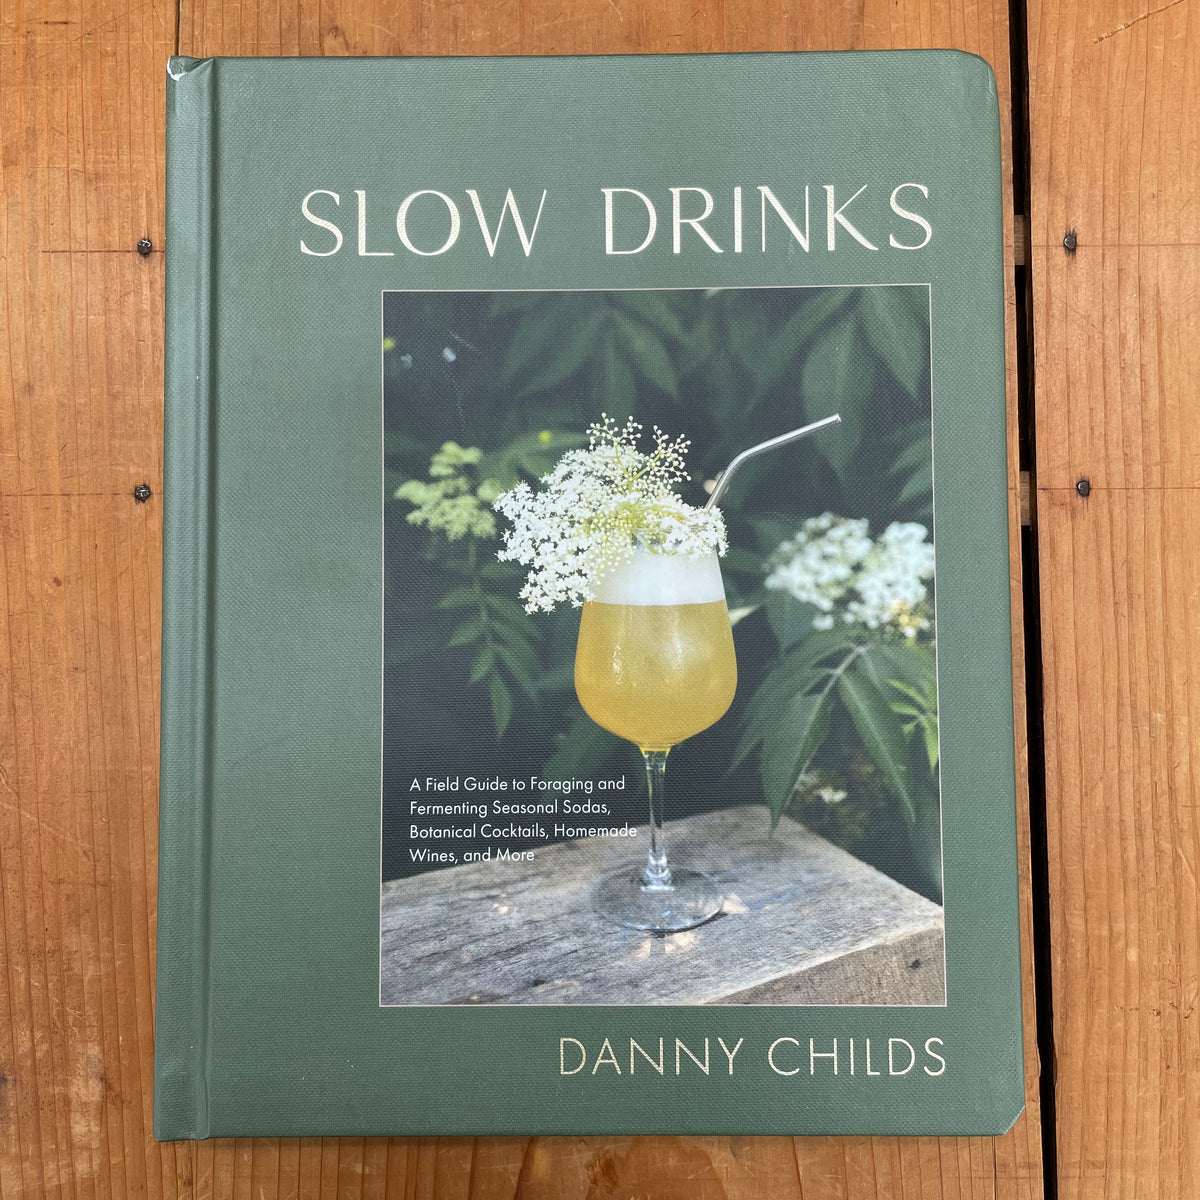 Slow Drinks: A Field Guide to Foraging and Fermenting Seasonal Sodas, Botanical Cocktails, Homemade Wines, and More  - Danny Childs